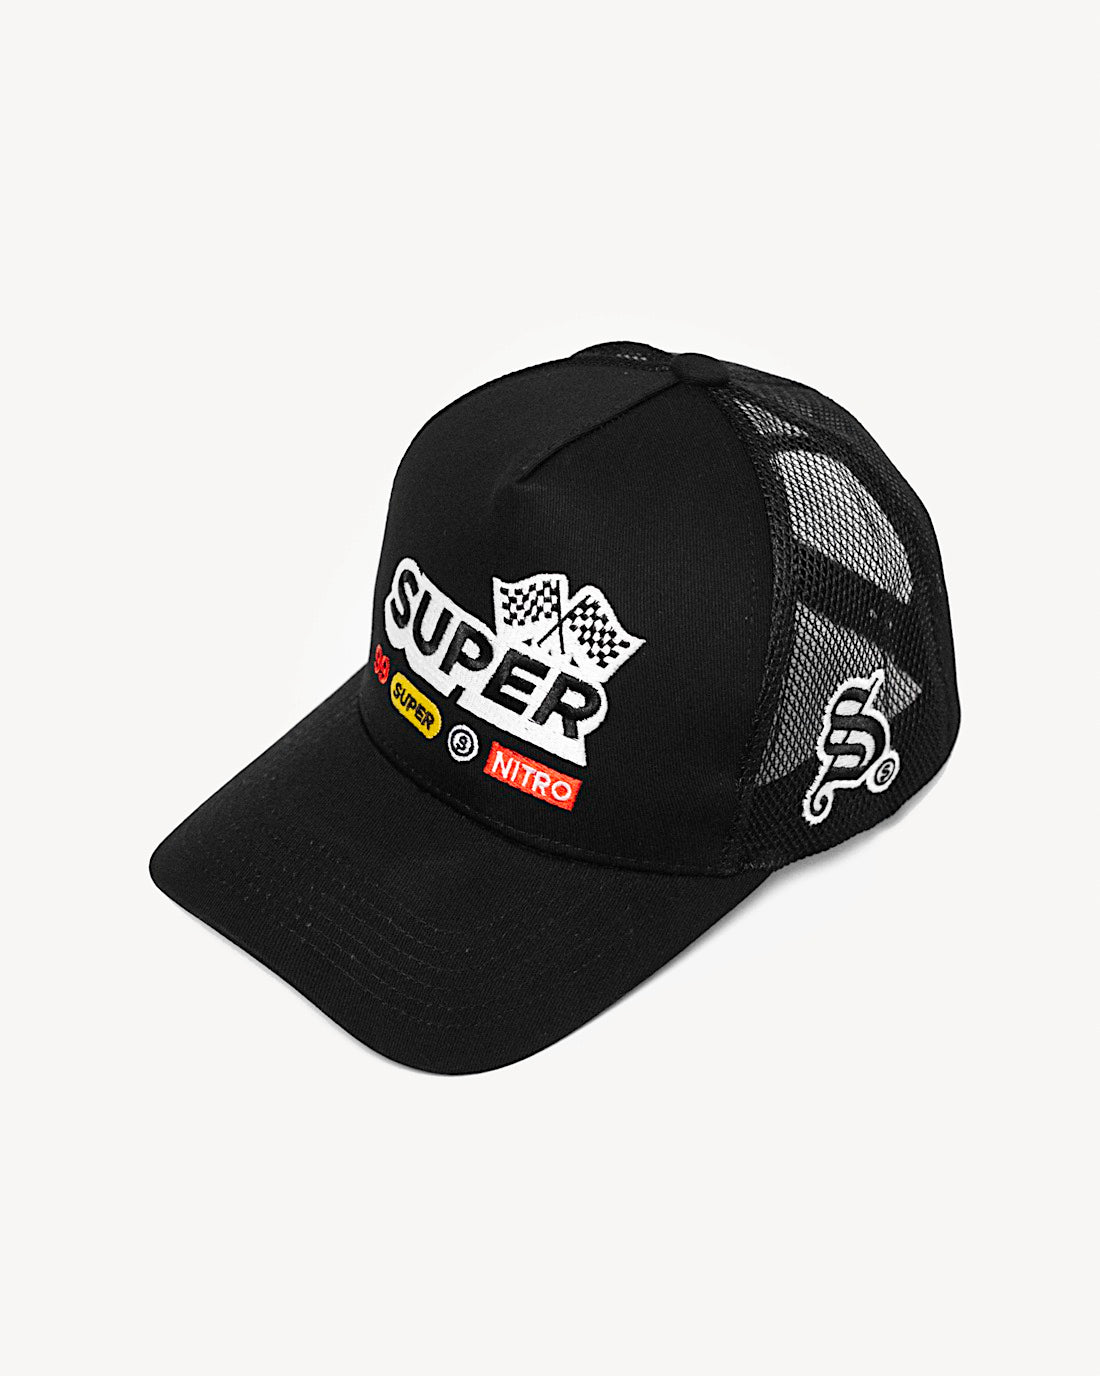 Front view of a stylish black snapback hat featuring colorful racing-inspired patches on the front and a cooling mesh rear design.